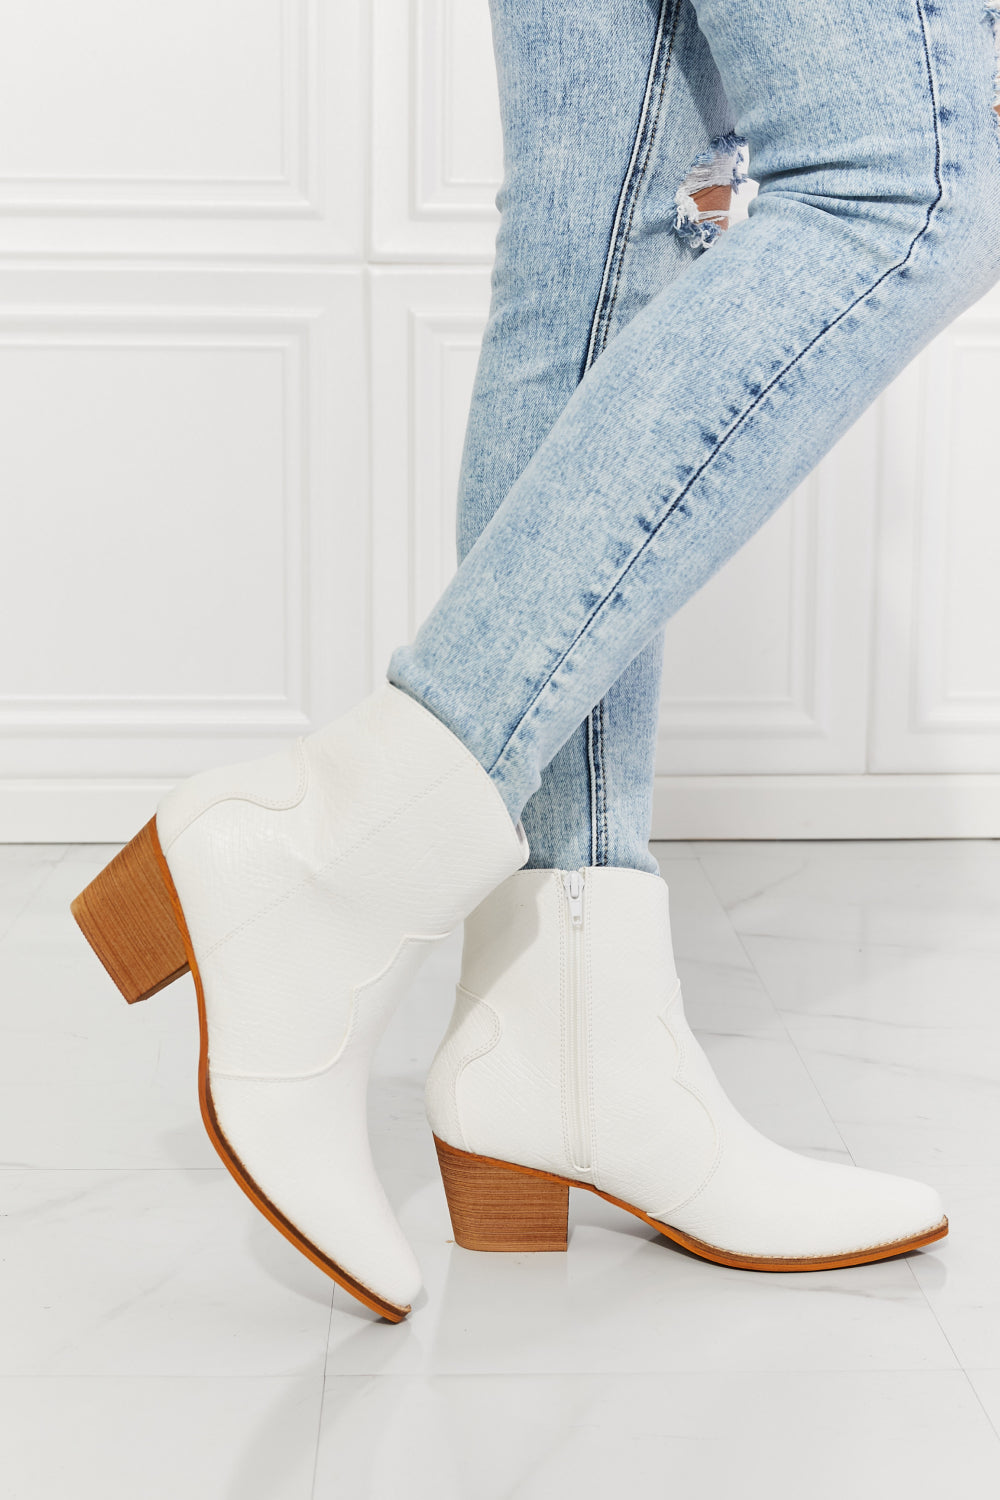 MMShoes Watertower Town Faux Leather Western Ankle Boots in White - FunkyPeacockStore (Store description)